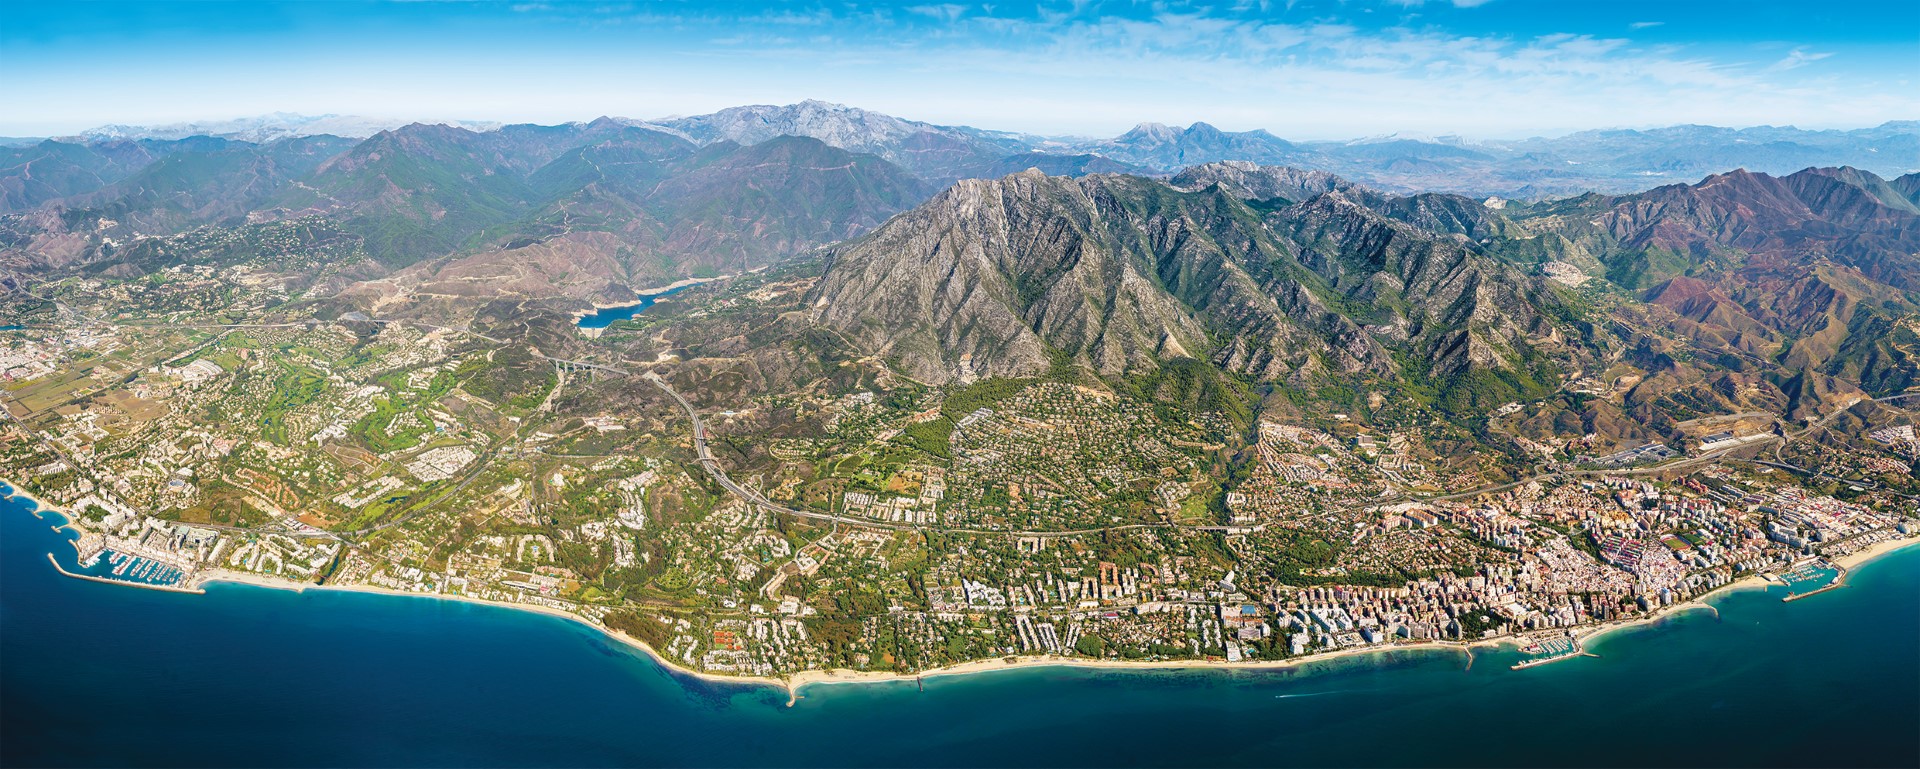 Thumbs Up for 250 New Luxury Homes in the Marbella Golden Mile